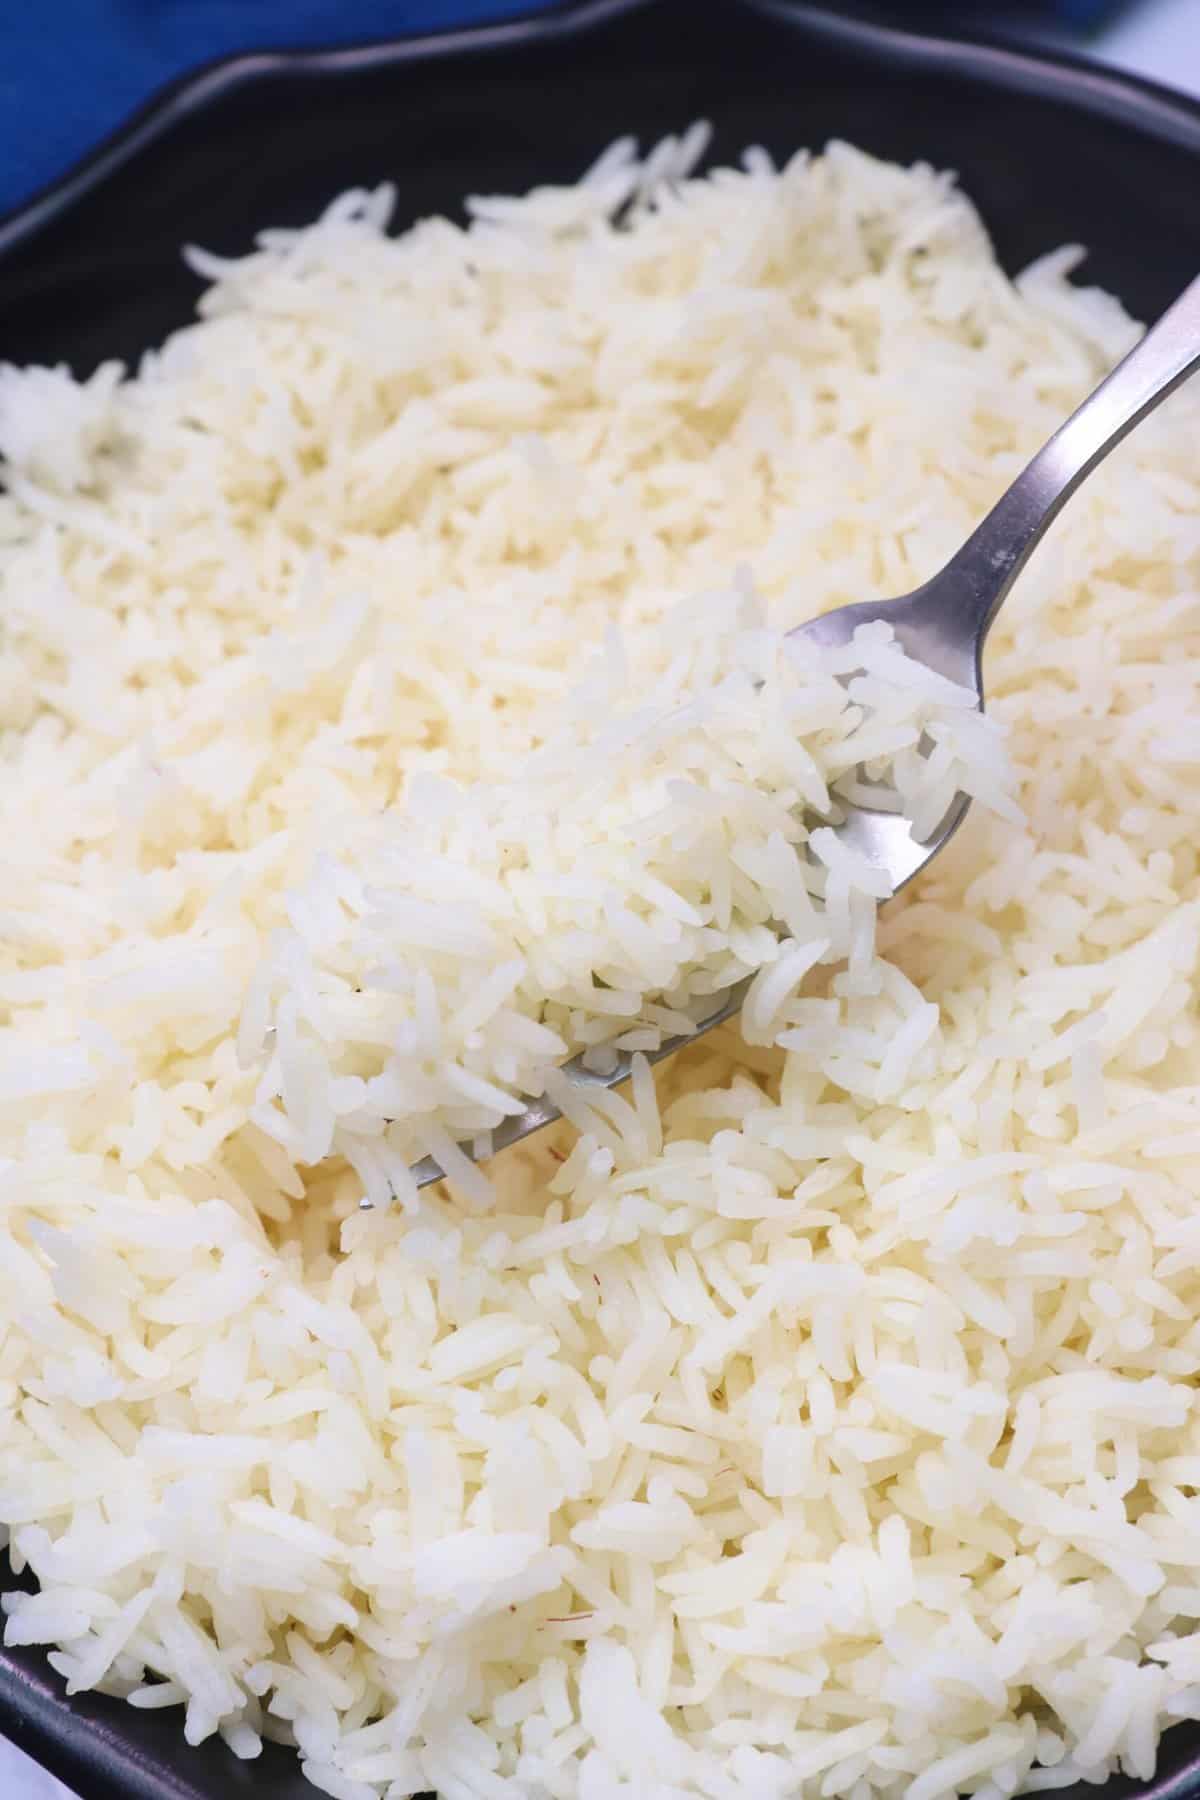 Fluffy basmati rice on a fork for your pleasure